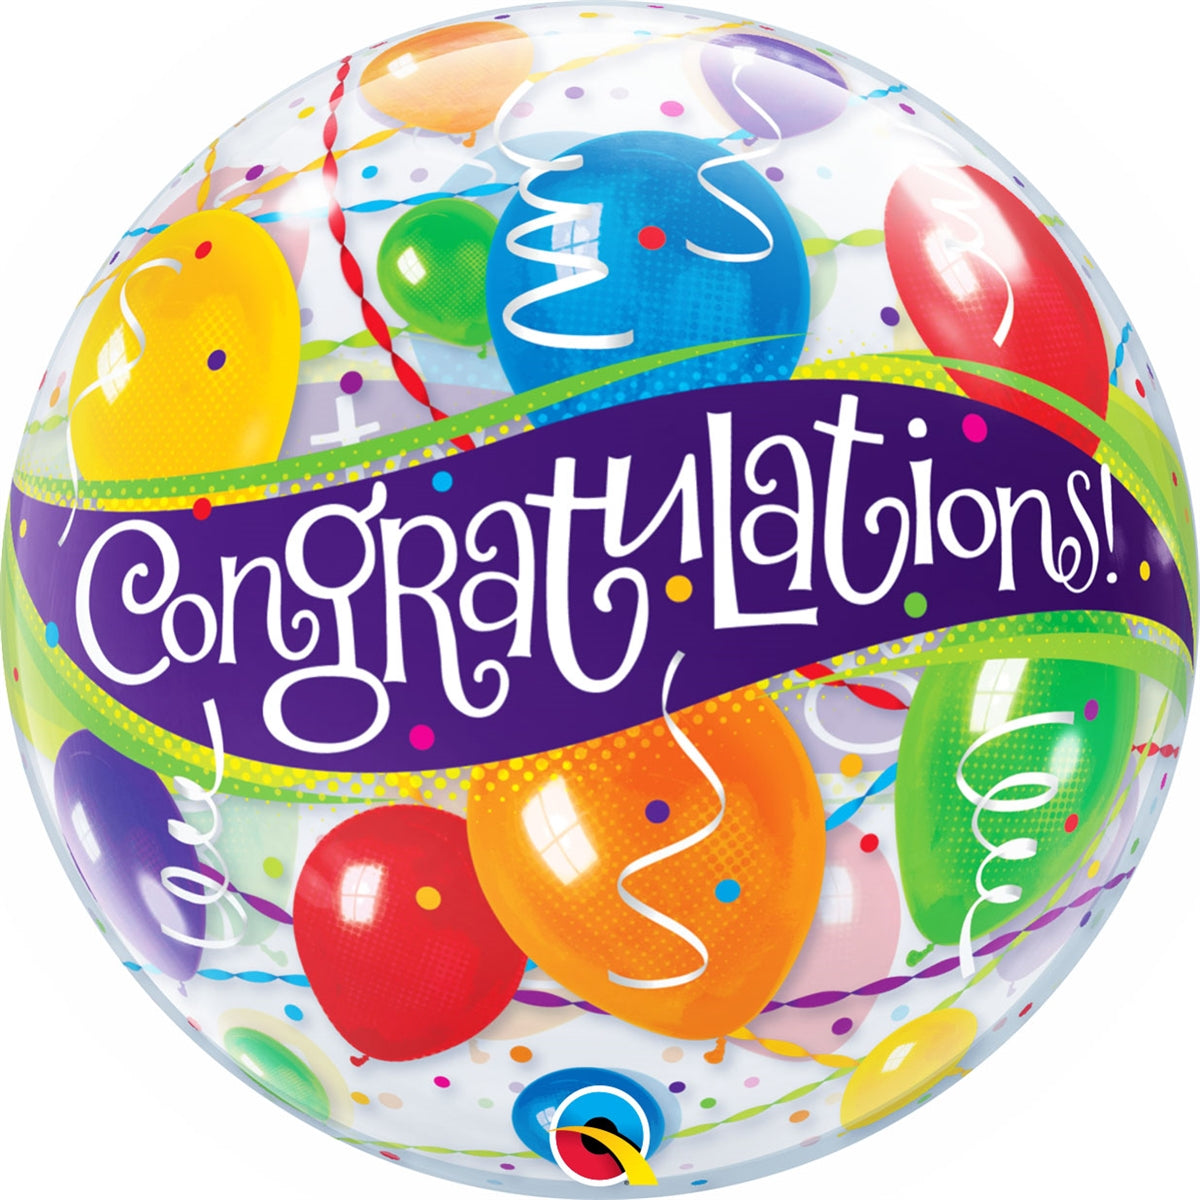 22" Congratulations Qualatex Balloons Bubble (WSL) | Clearance - While Supplies Last